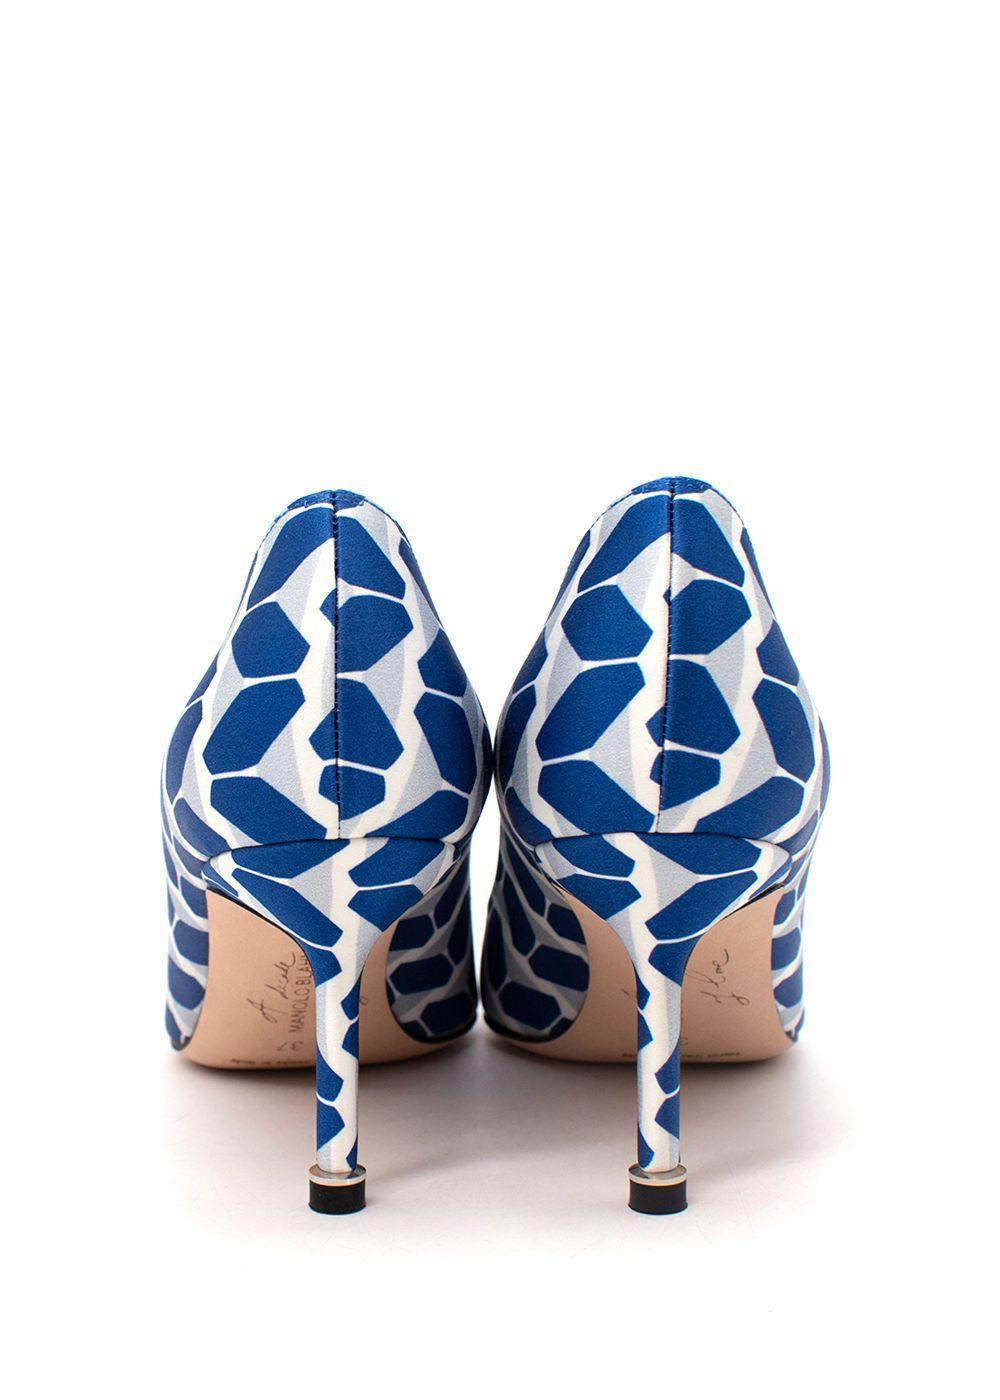 Manolo Blahnik Blue Hangisi 105 Cosmo Embellished Pumps In Excellent Condition In London, GB